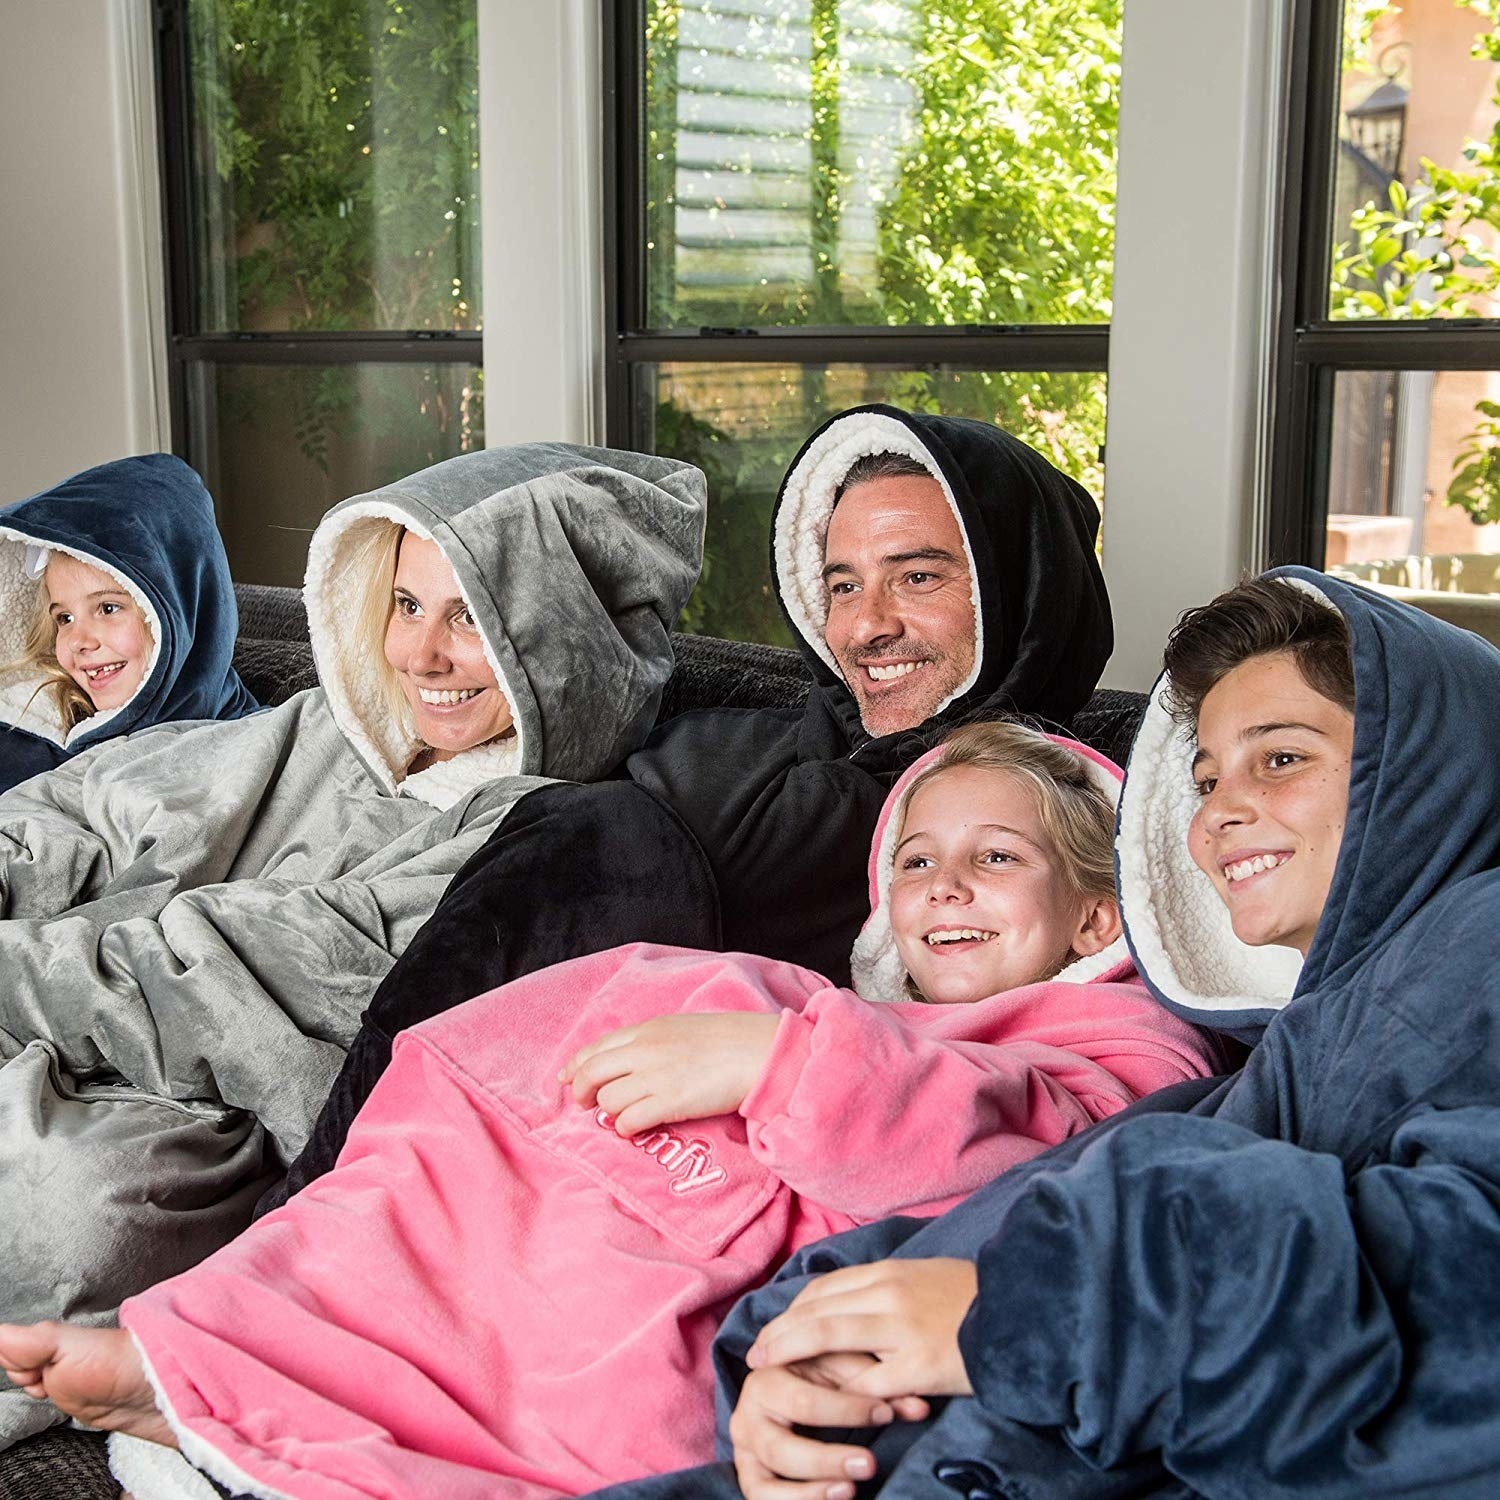 A family cuddled together while all wearing one of the hoodies